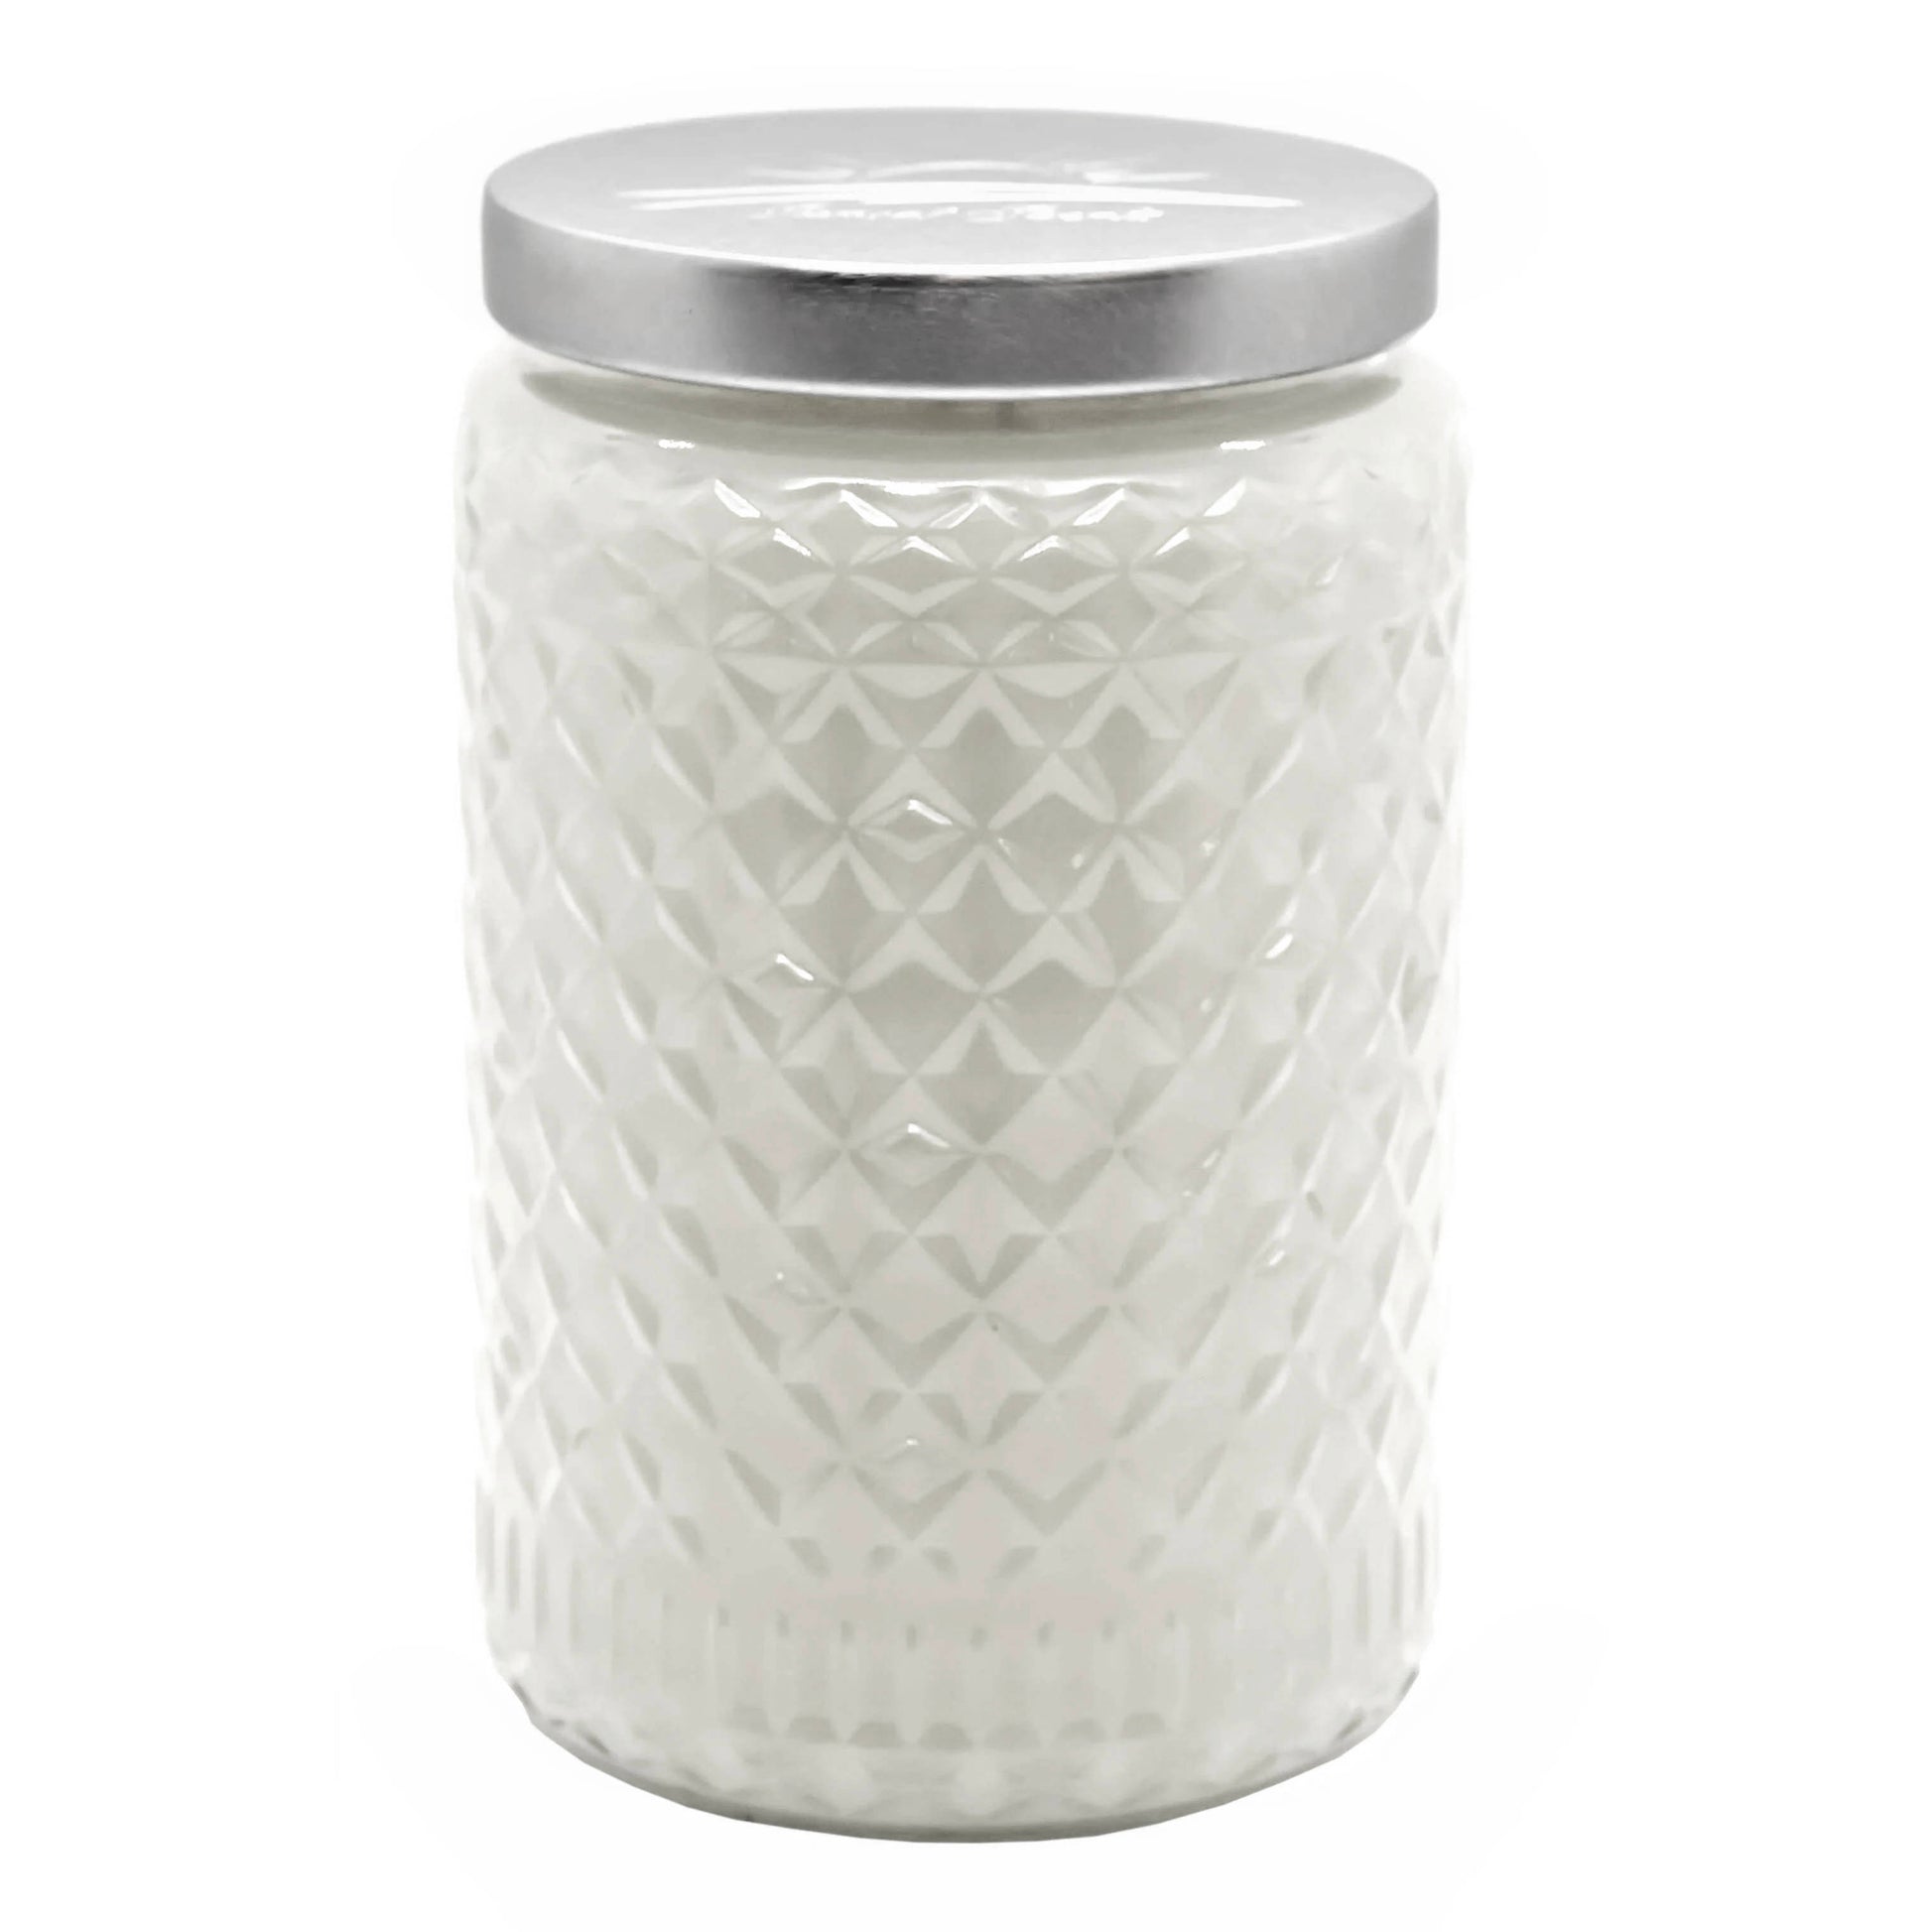 Fresh Linen Scented Candle 24oz